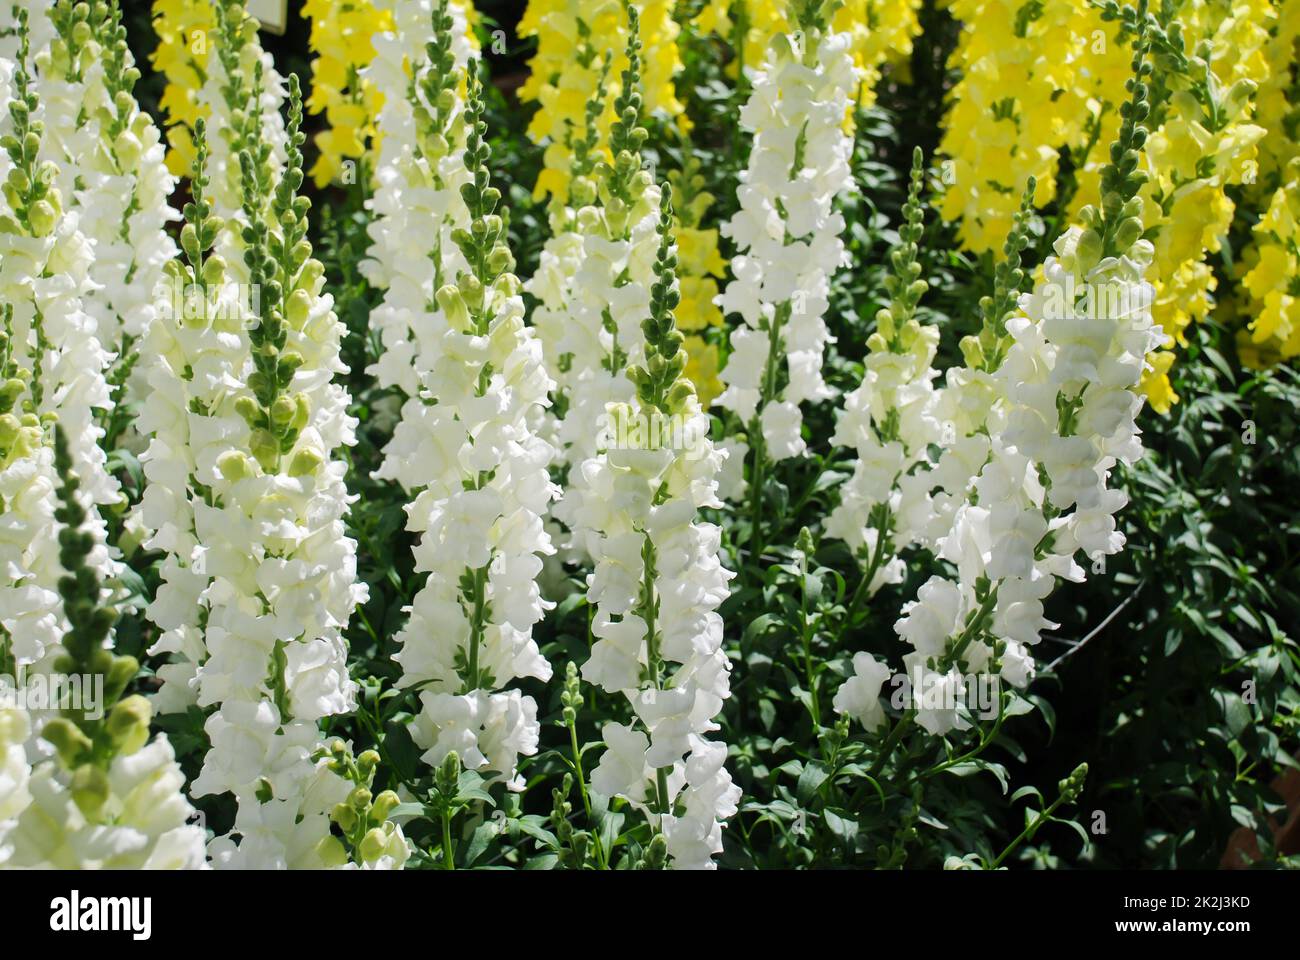 Colorful Snapdragon (Antirrhinum majus) blooming in the garden background with selective focus Stock Photo